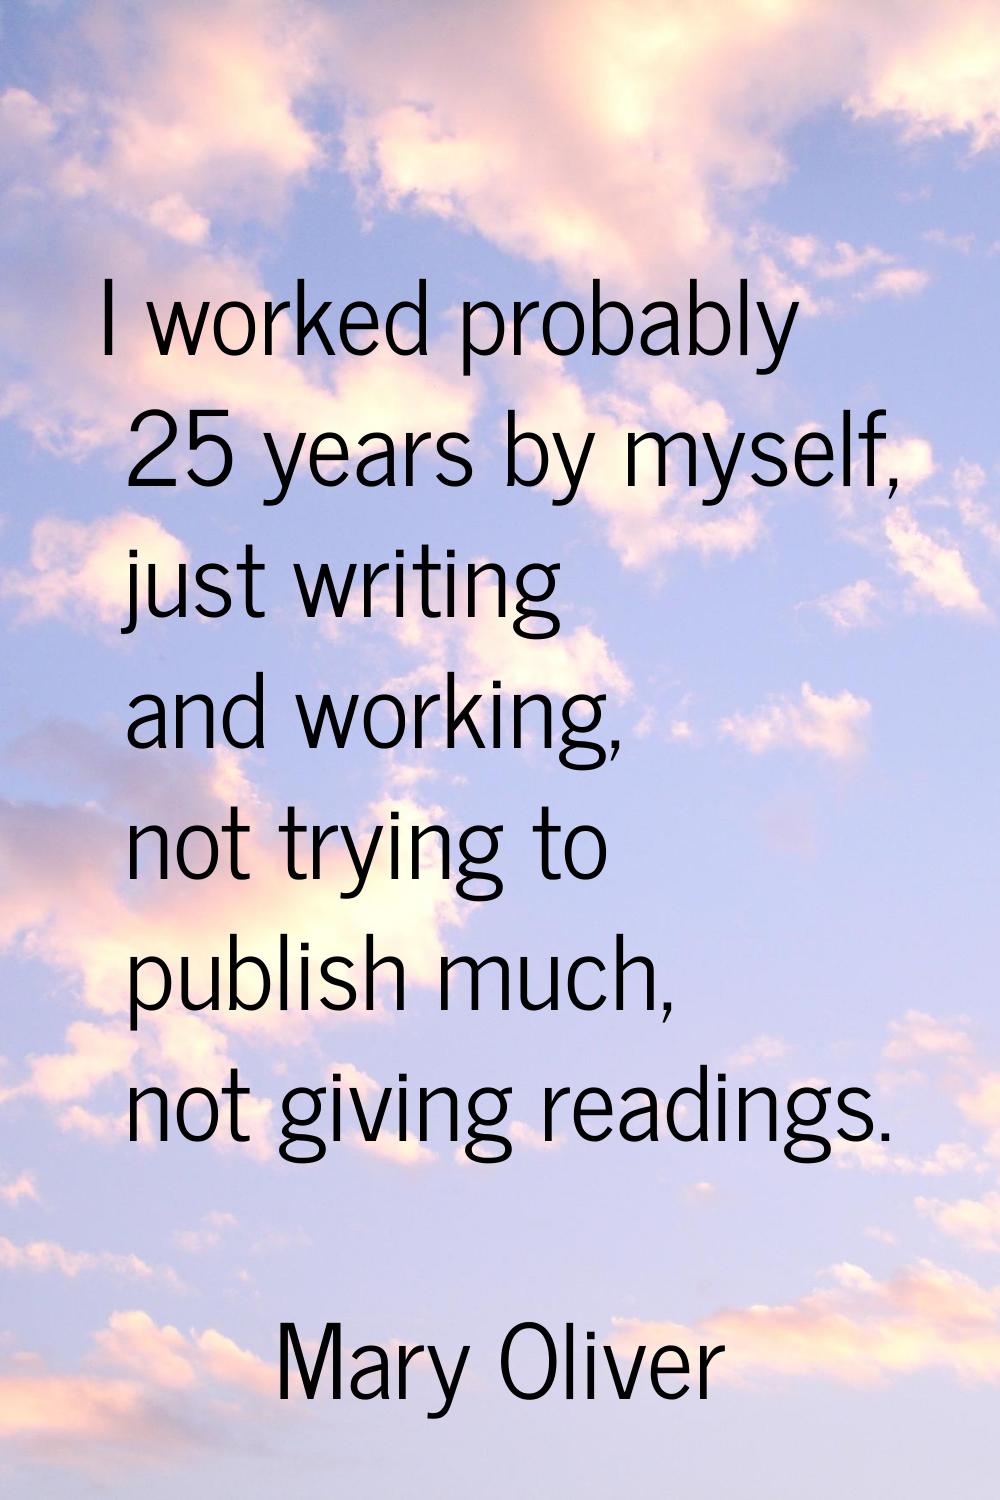 I worked probably 25 years by myself, just writing and working, not trying to publish much, not giv